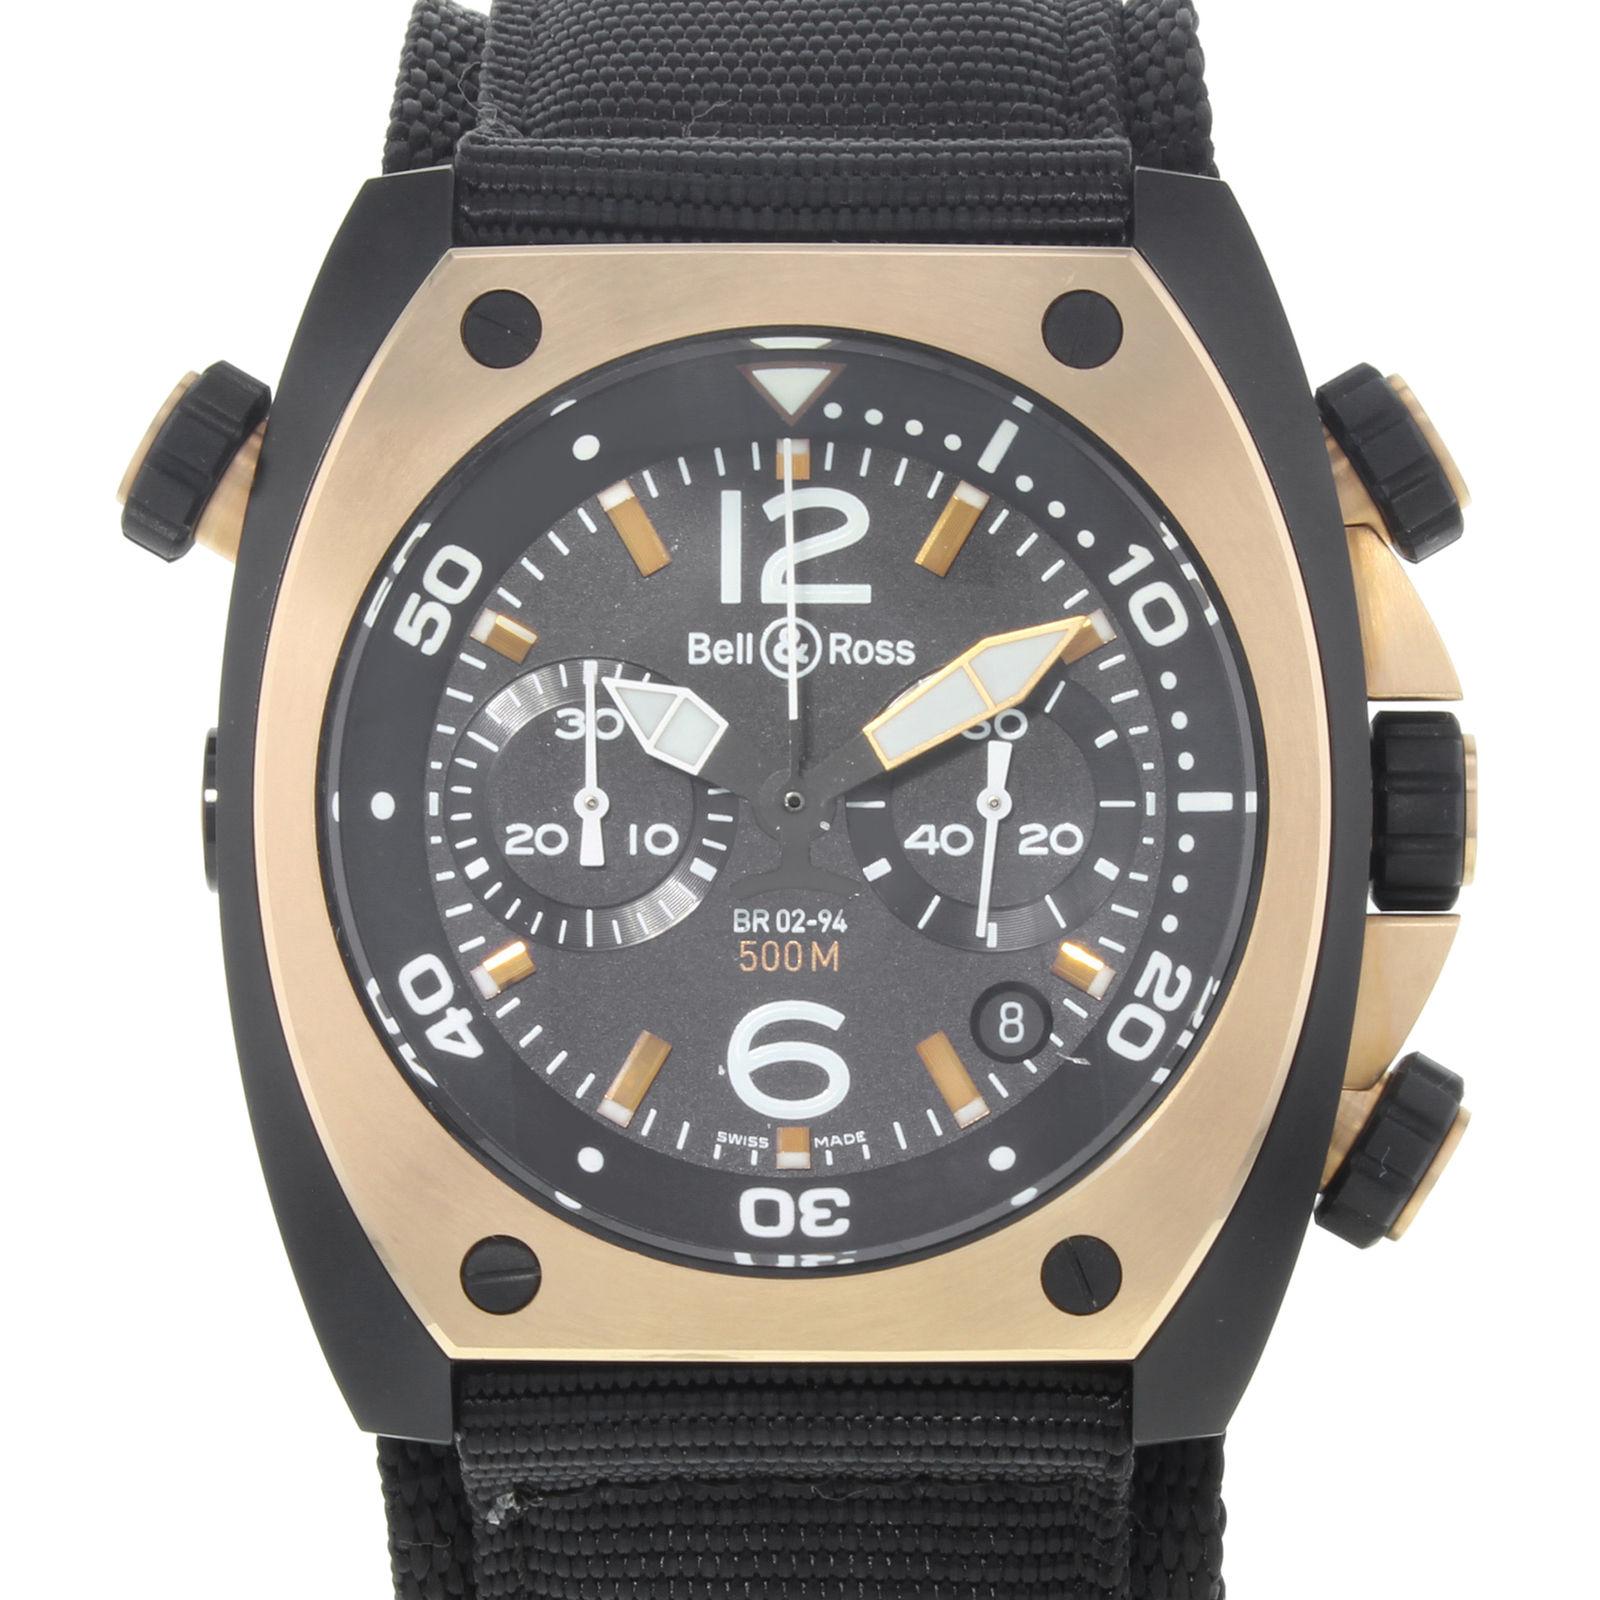 (16133)
This display model Bell & Ross Marine BR02-CHR-BICOLO is a beautiful Gents timepiece that is powered by an automatic movement which is cased in a stainless steel case. It has a round shape face, dial and has hand sticks style markers. It is